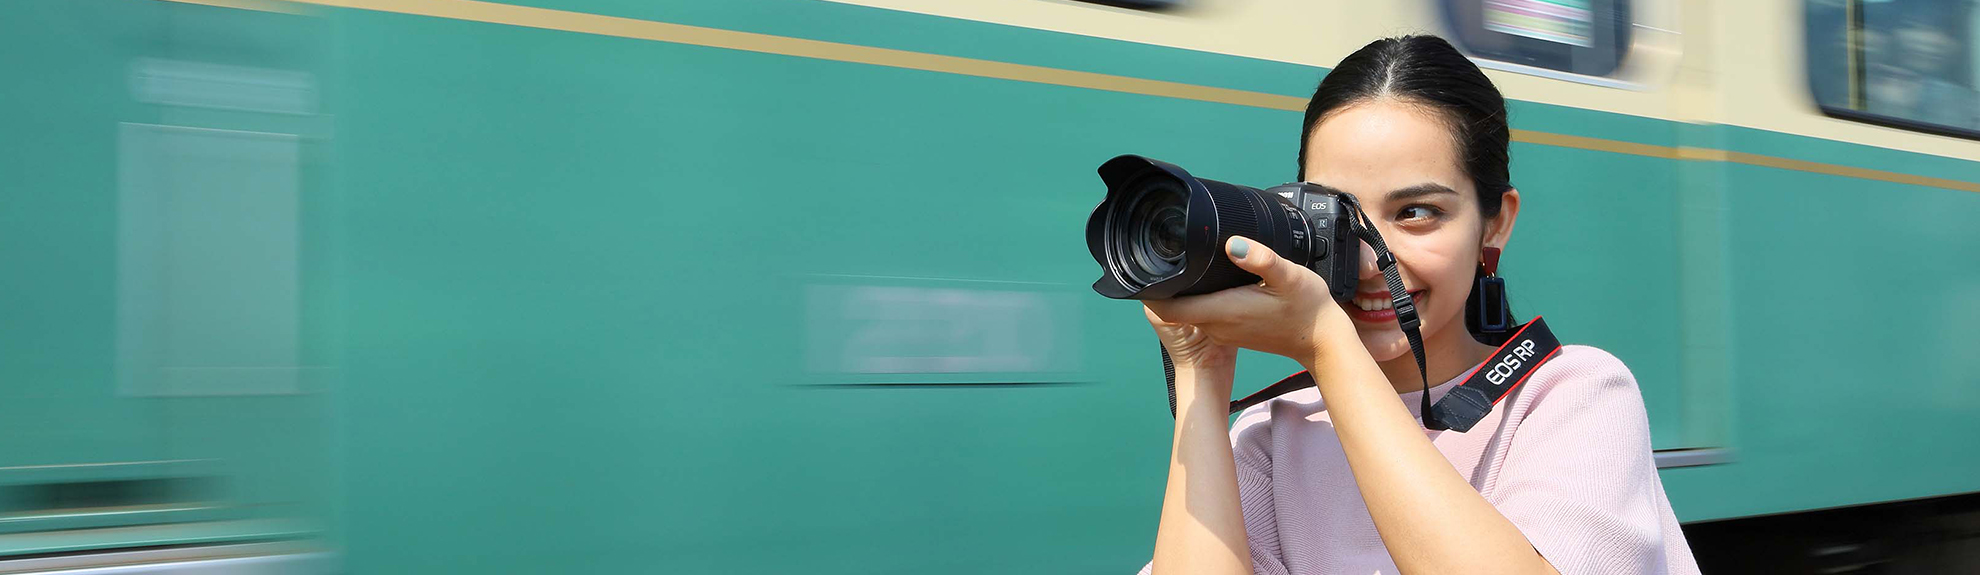 Woman using camera, standing next to train